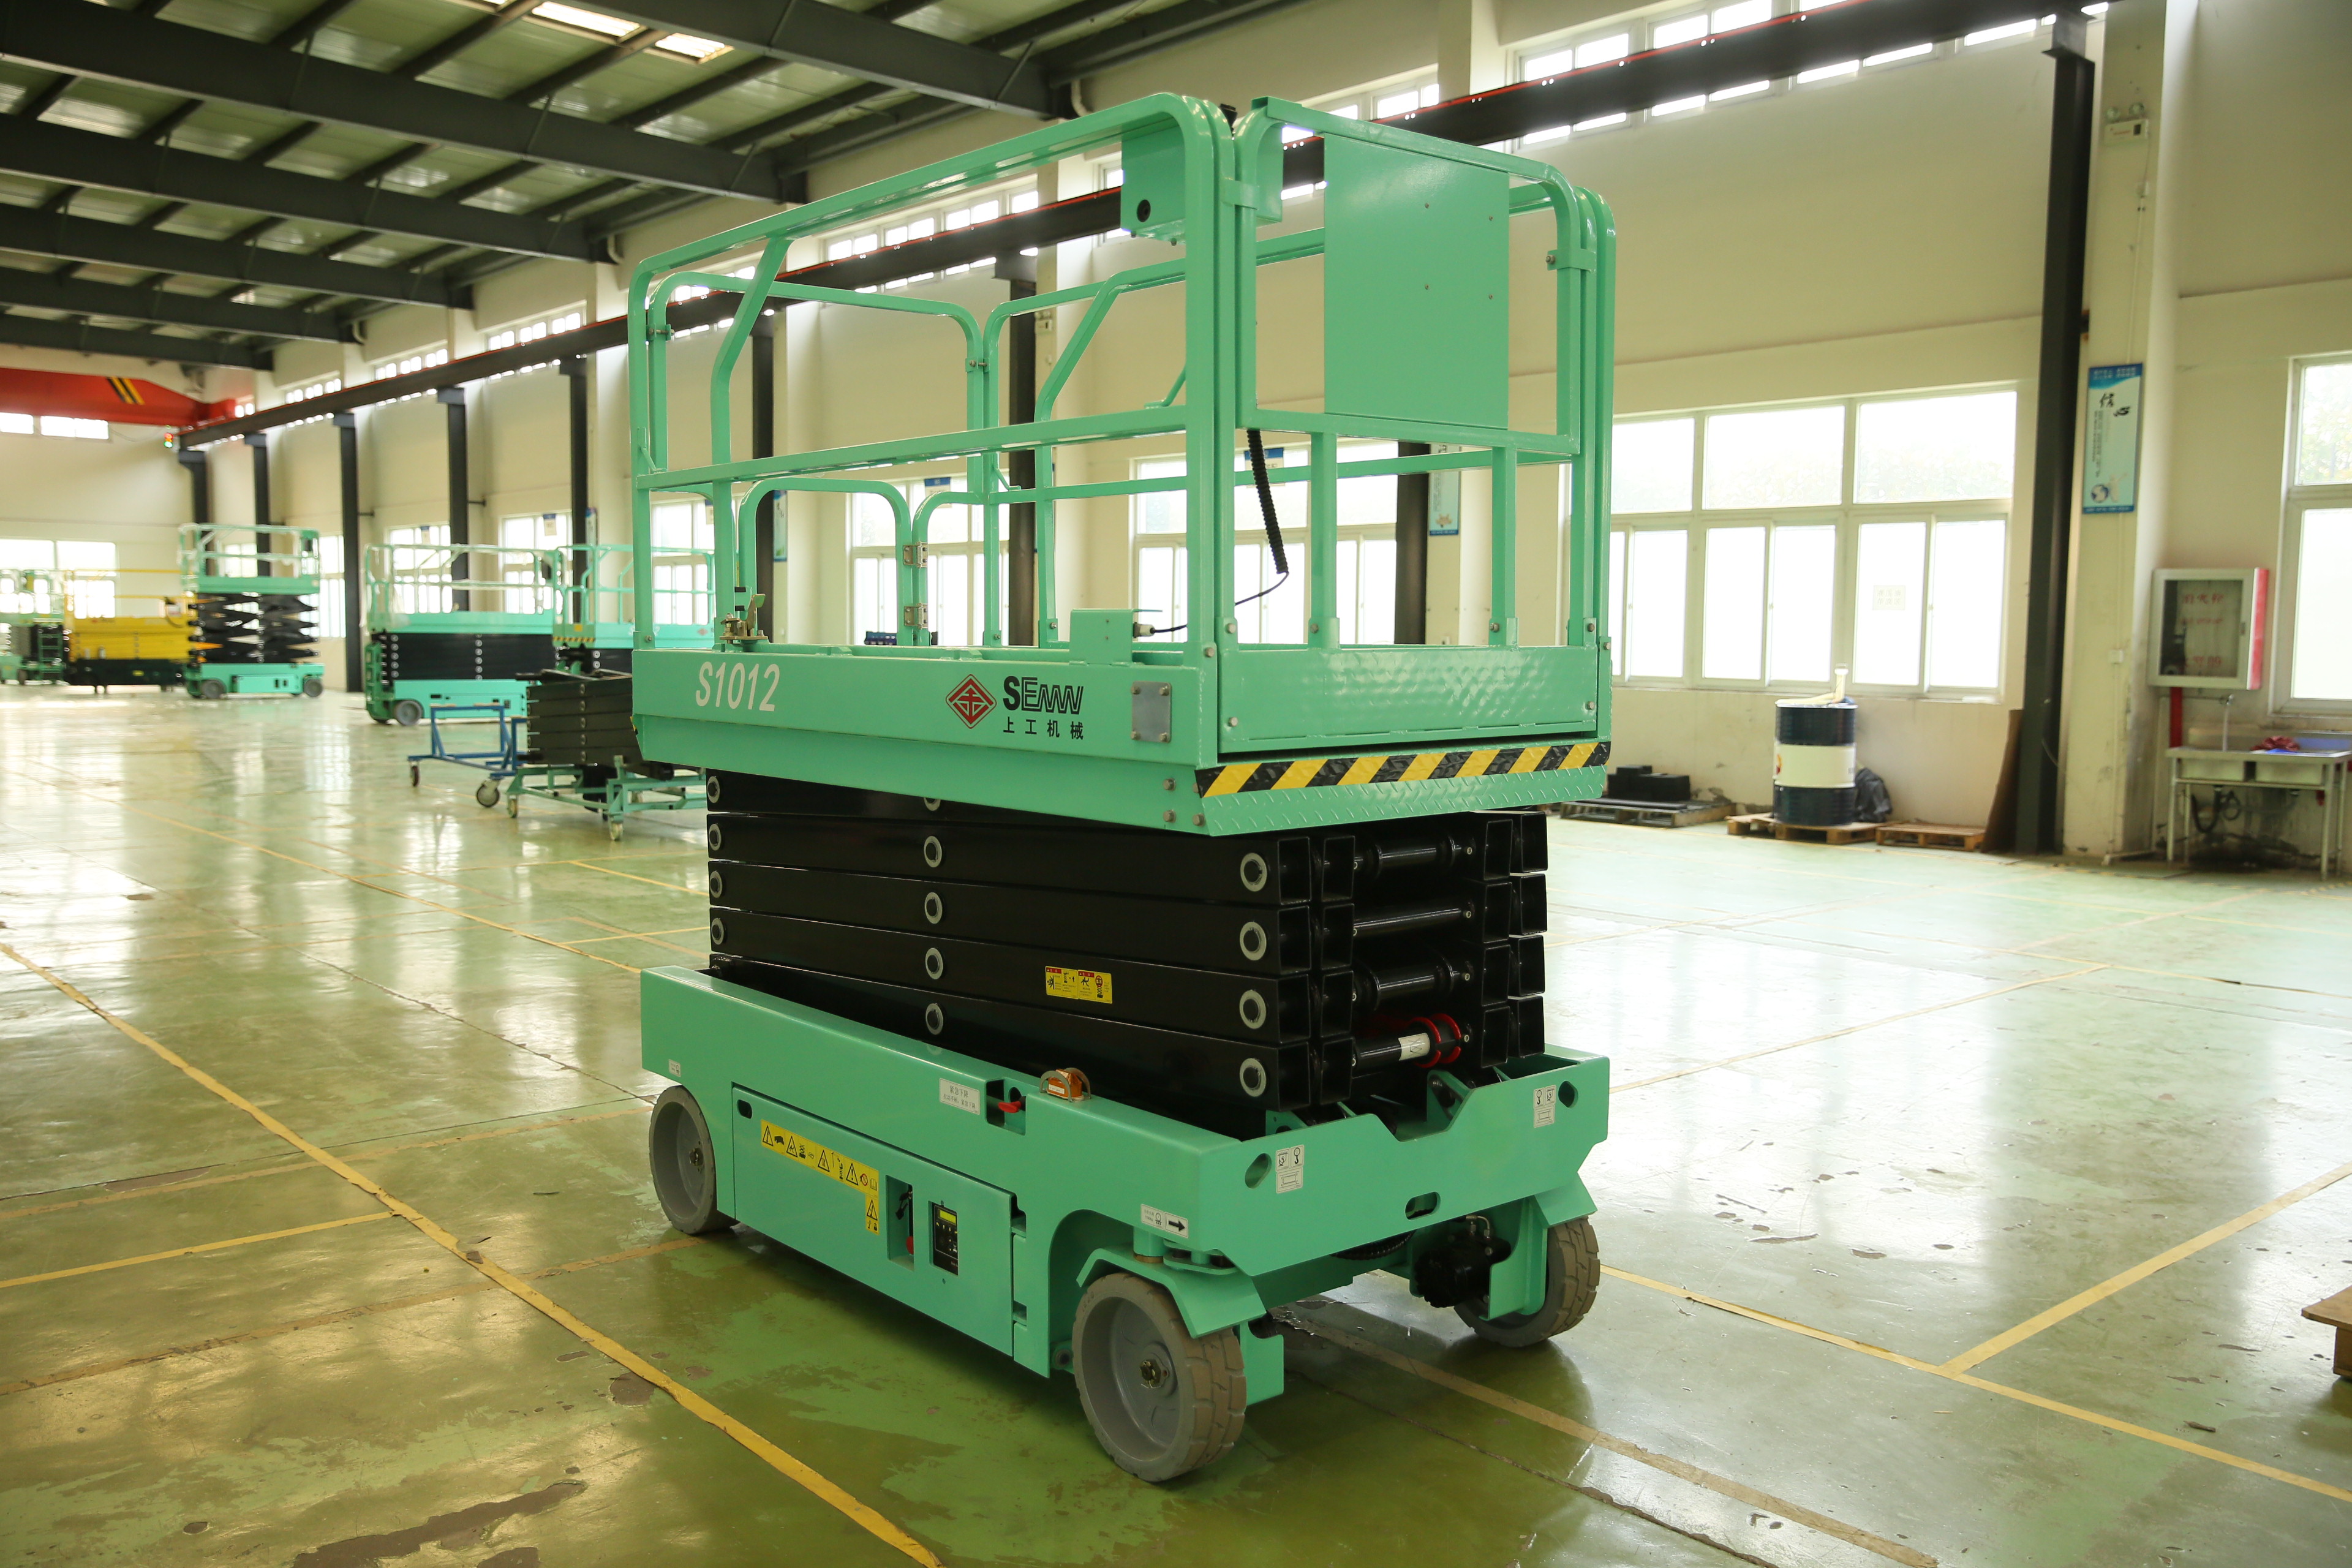 S1012 Self-Propelled Scissor Lifts Featured Image